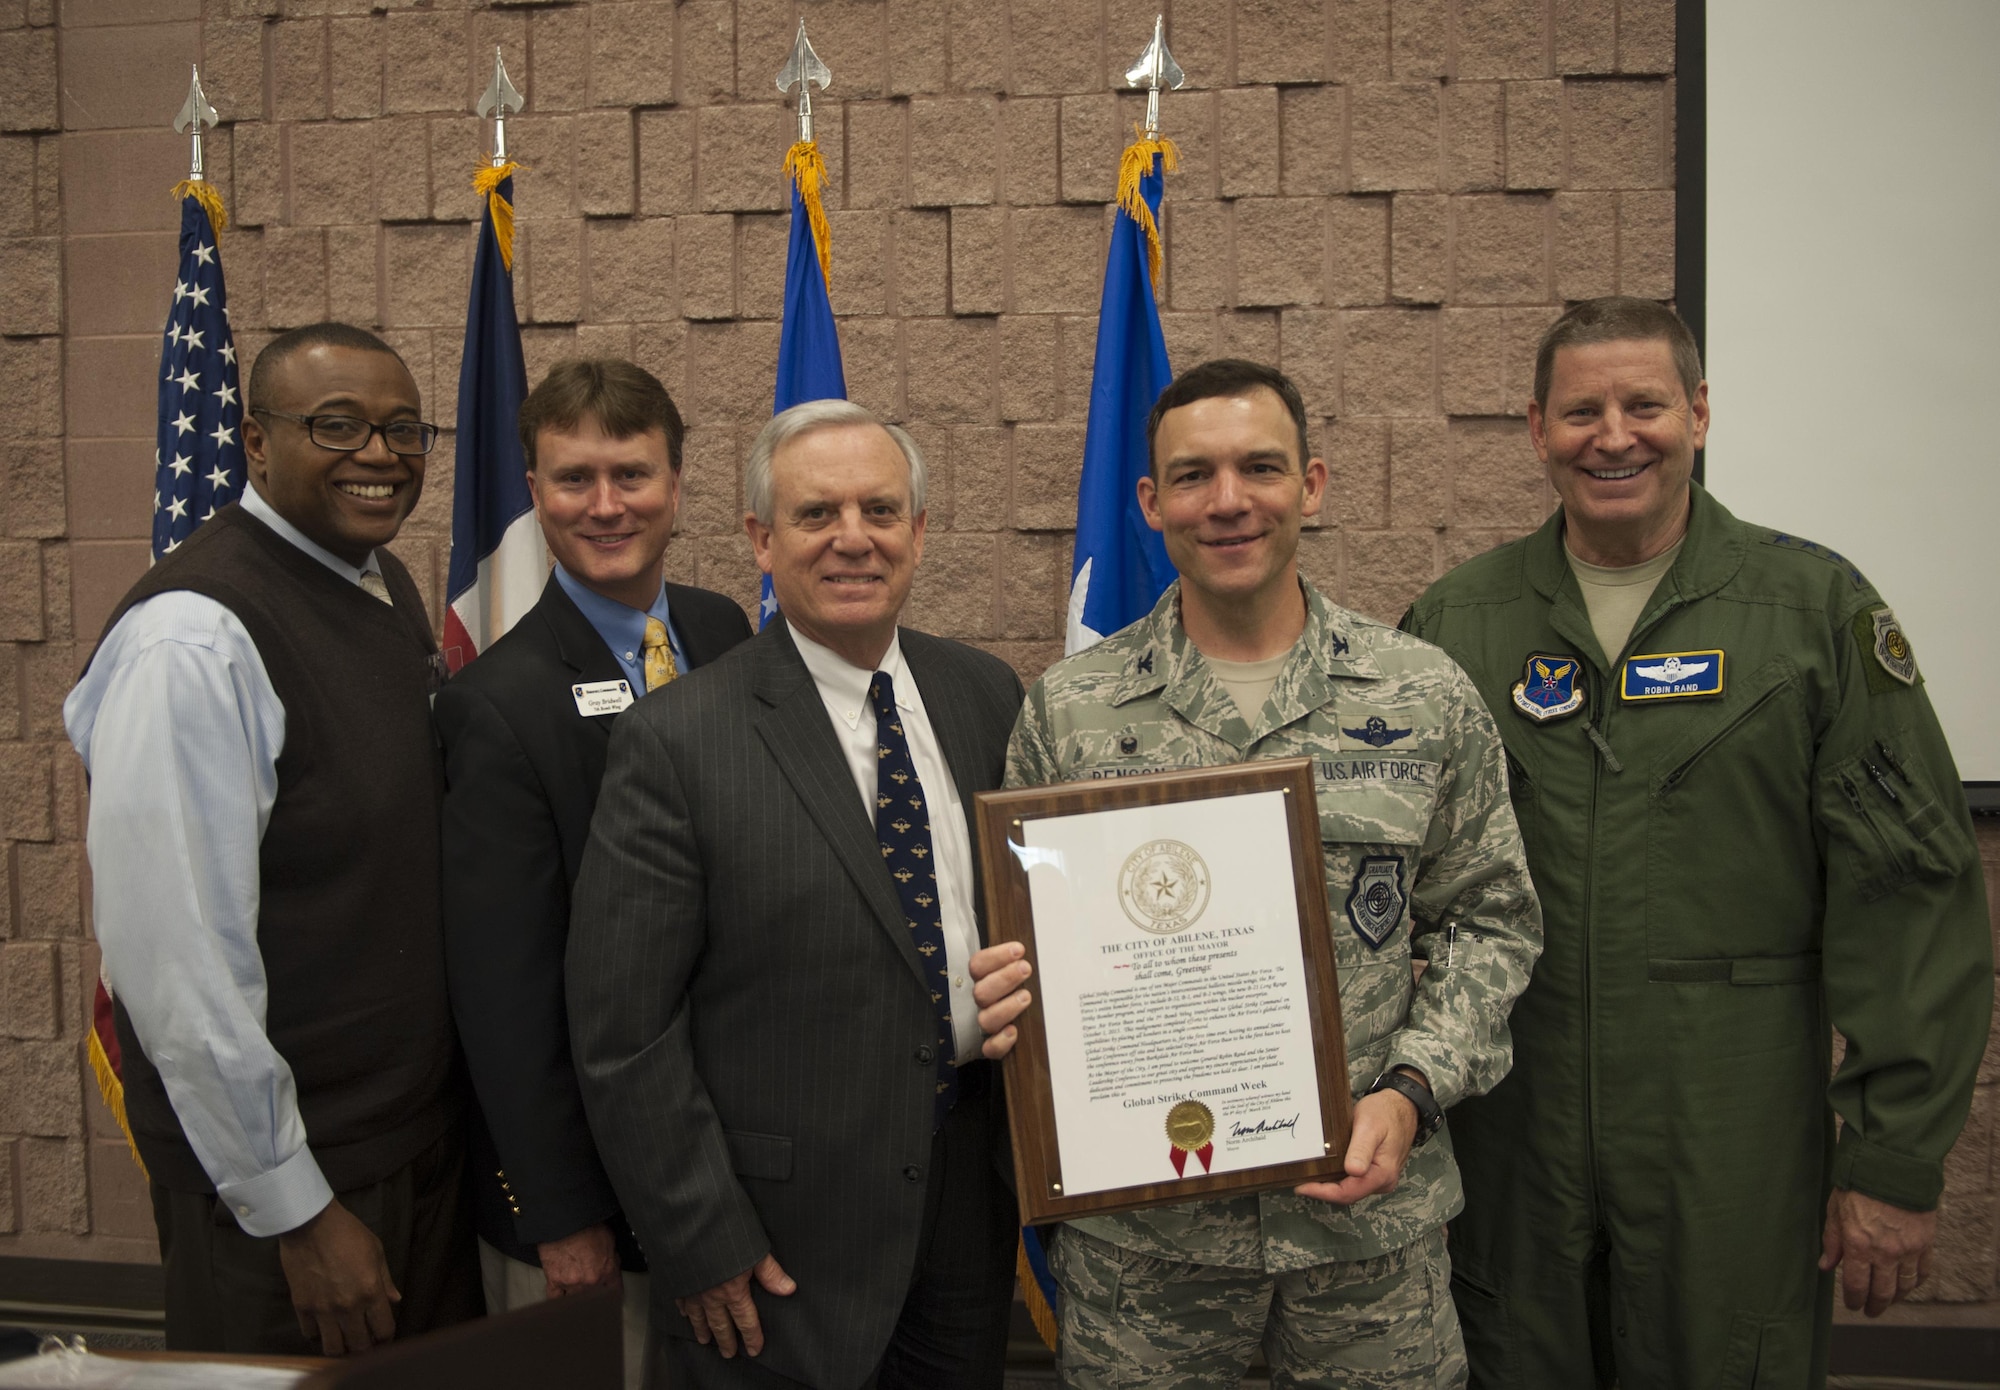 Abilene city councilman Anthony Williams, Abilene Military Affairs Committee chairman Gray Bridwell, and Abilene mayor Norm Archibald present Col. David Benson, 7th Bomb Wing commander, and Gen. Robin Rand, AFGSC commander, with a proclamation declaring March 6-12 “Global Strike Week” March 9, 2016, at the Civic Center in Abilene, Texas. The declaration came as a tribute to Dyess Air Force Base being the chosen location for the Air Force Global Strike Command's Senior Leader Conference. (U.S. Air Force photo by Airman 1st Class Quay Drawdy/Released)